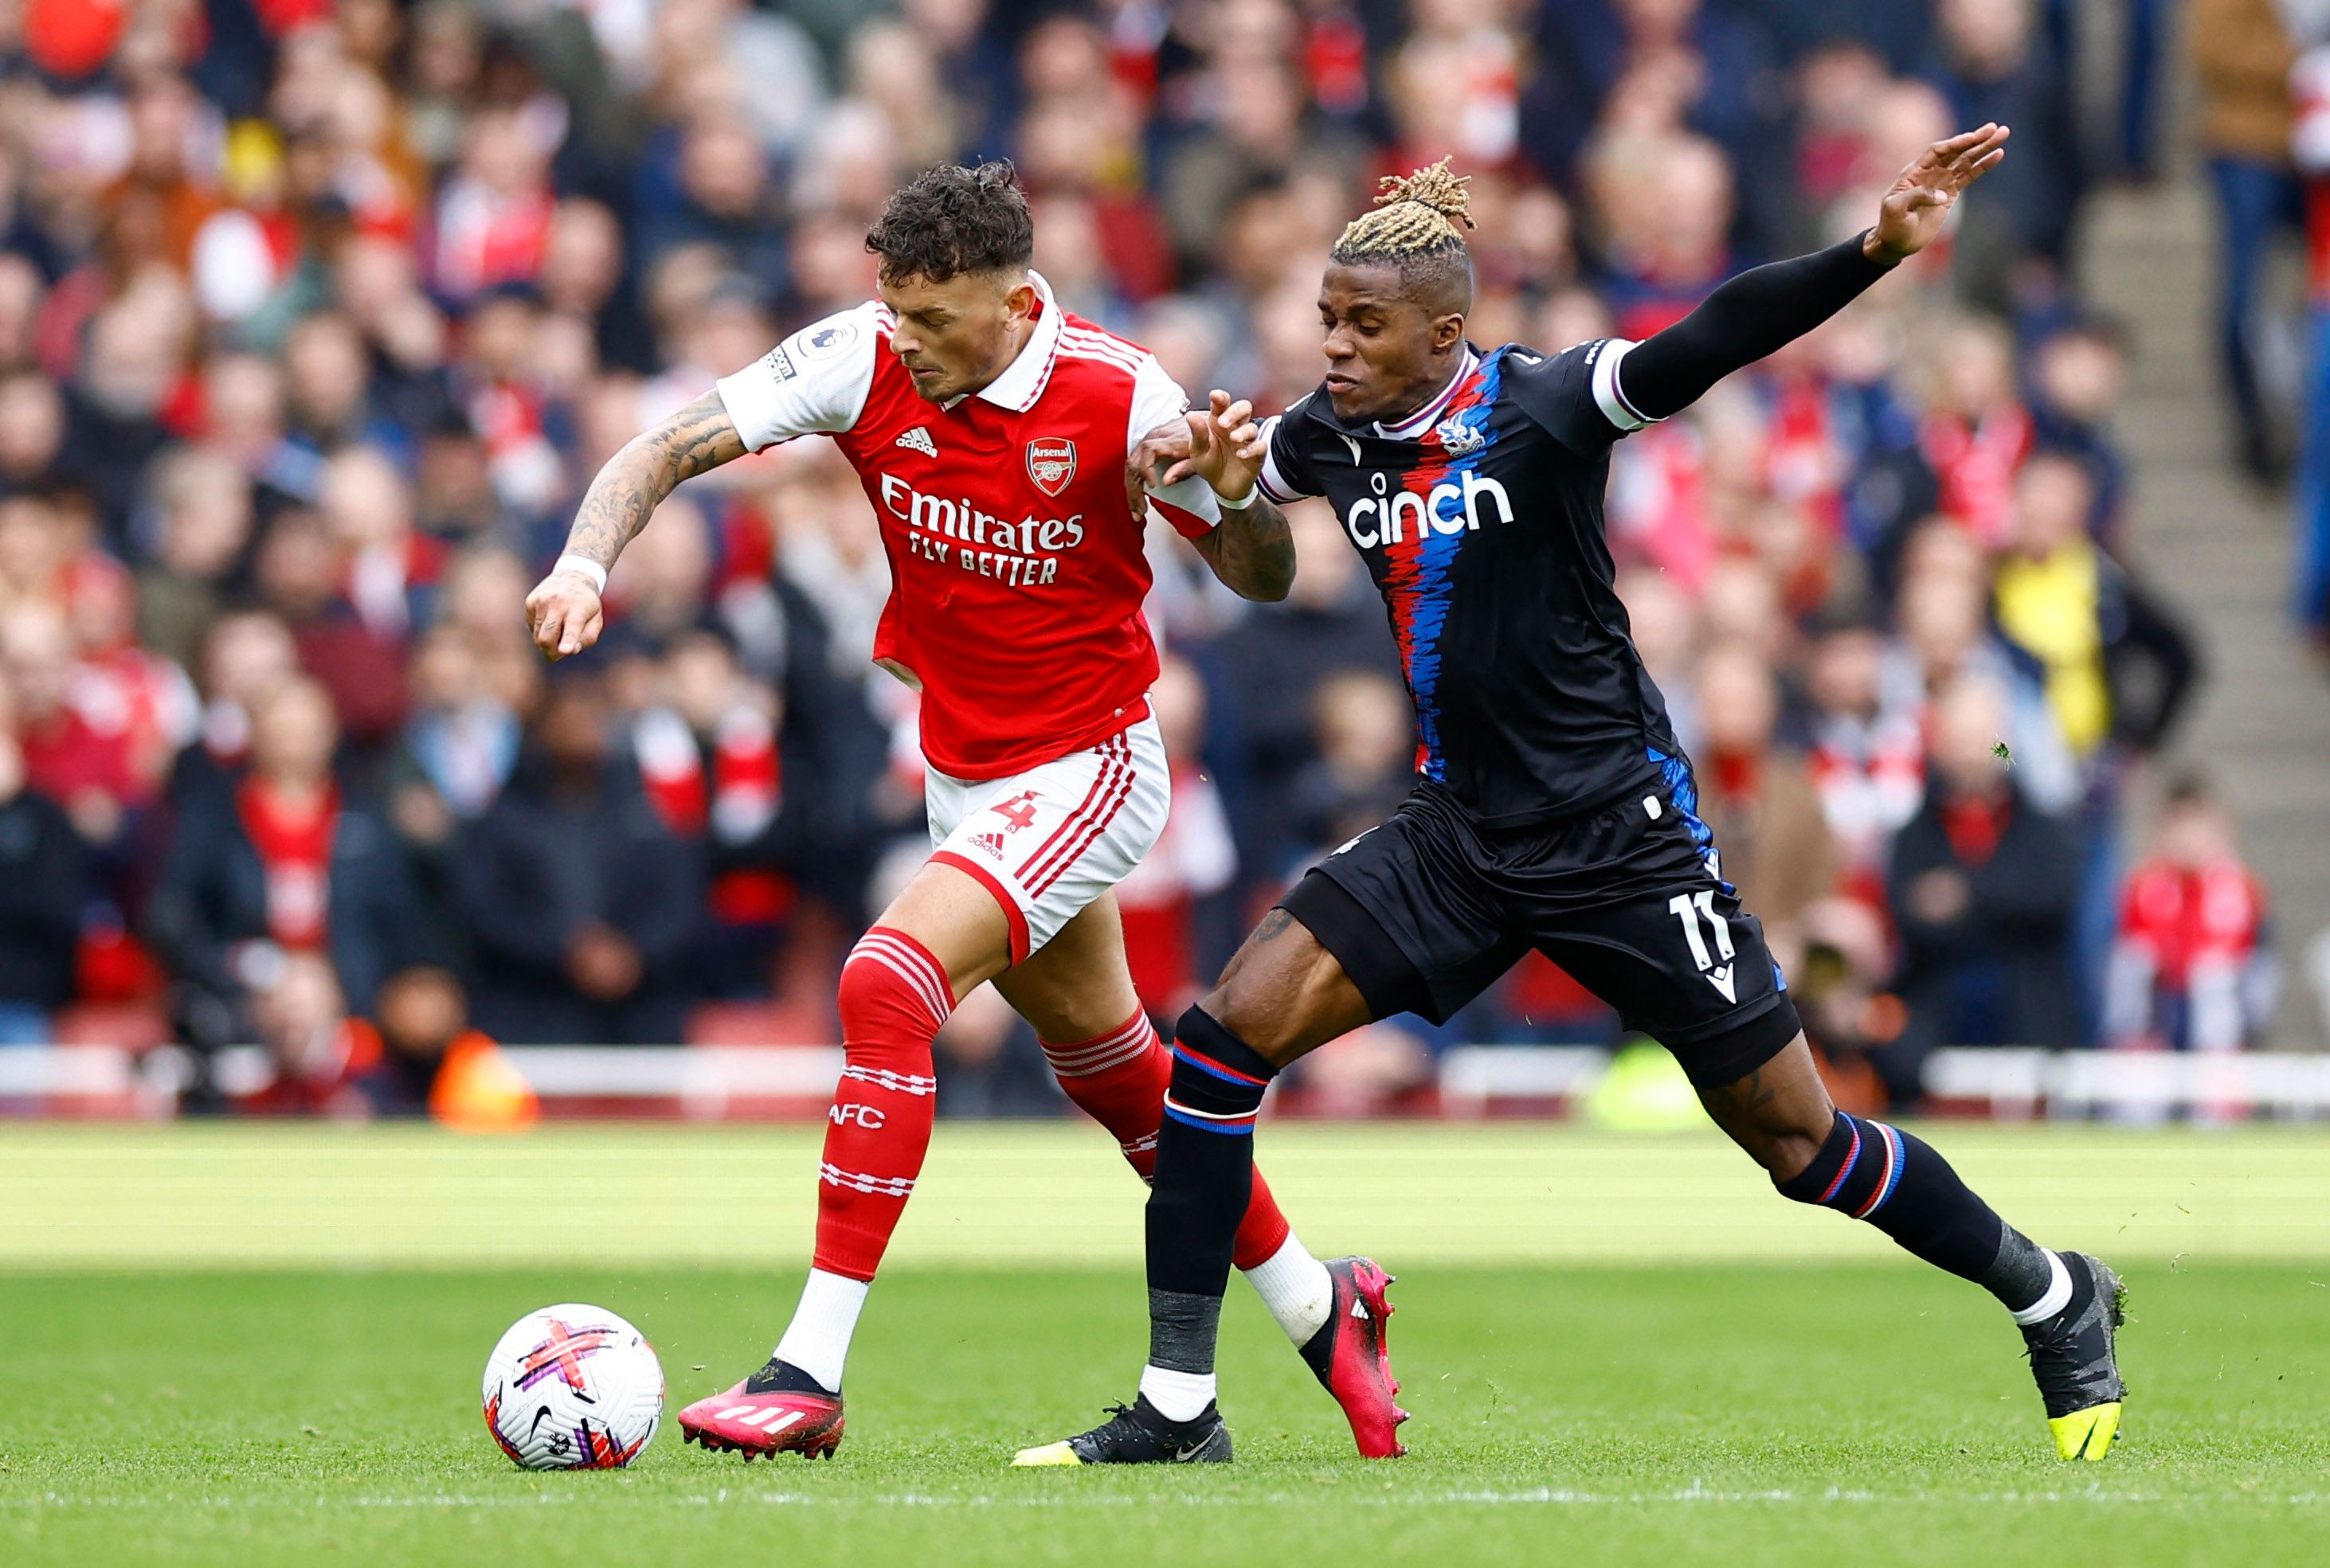 Arsenal's Ben White in action with Crystal Palace's Wilfried Zaha